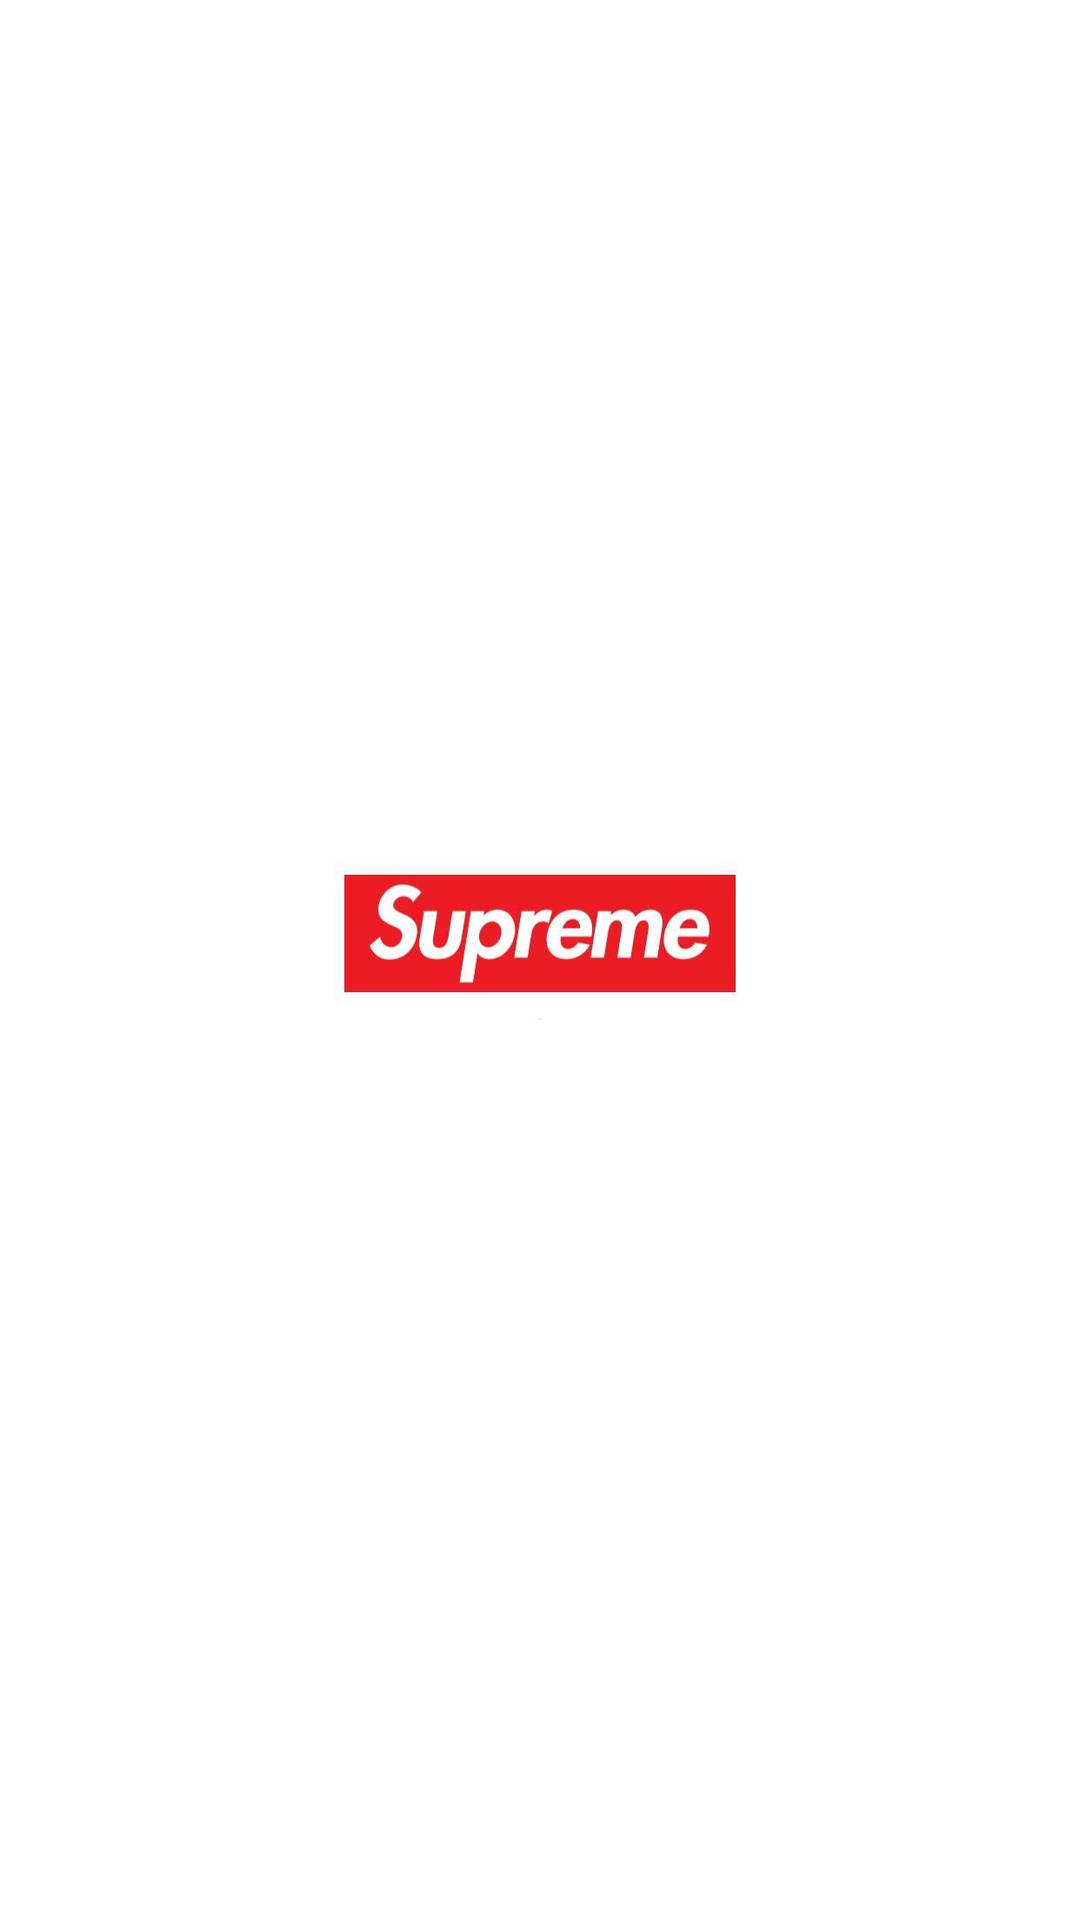 [100+] Dope Supreme Wallpapers | Wallpapers.com